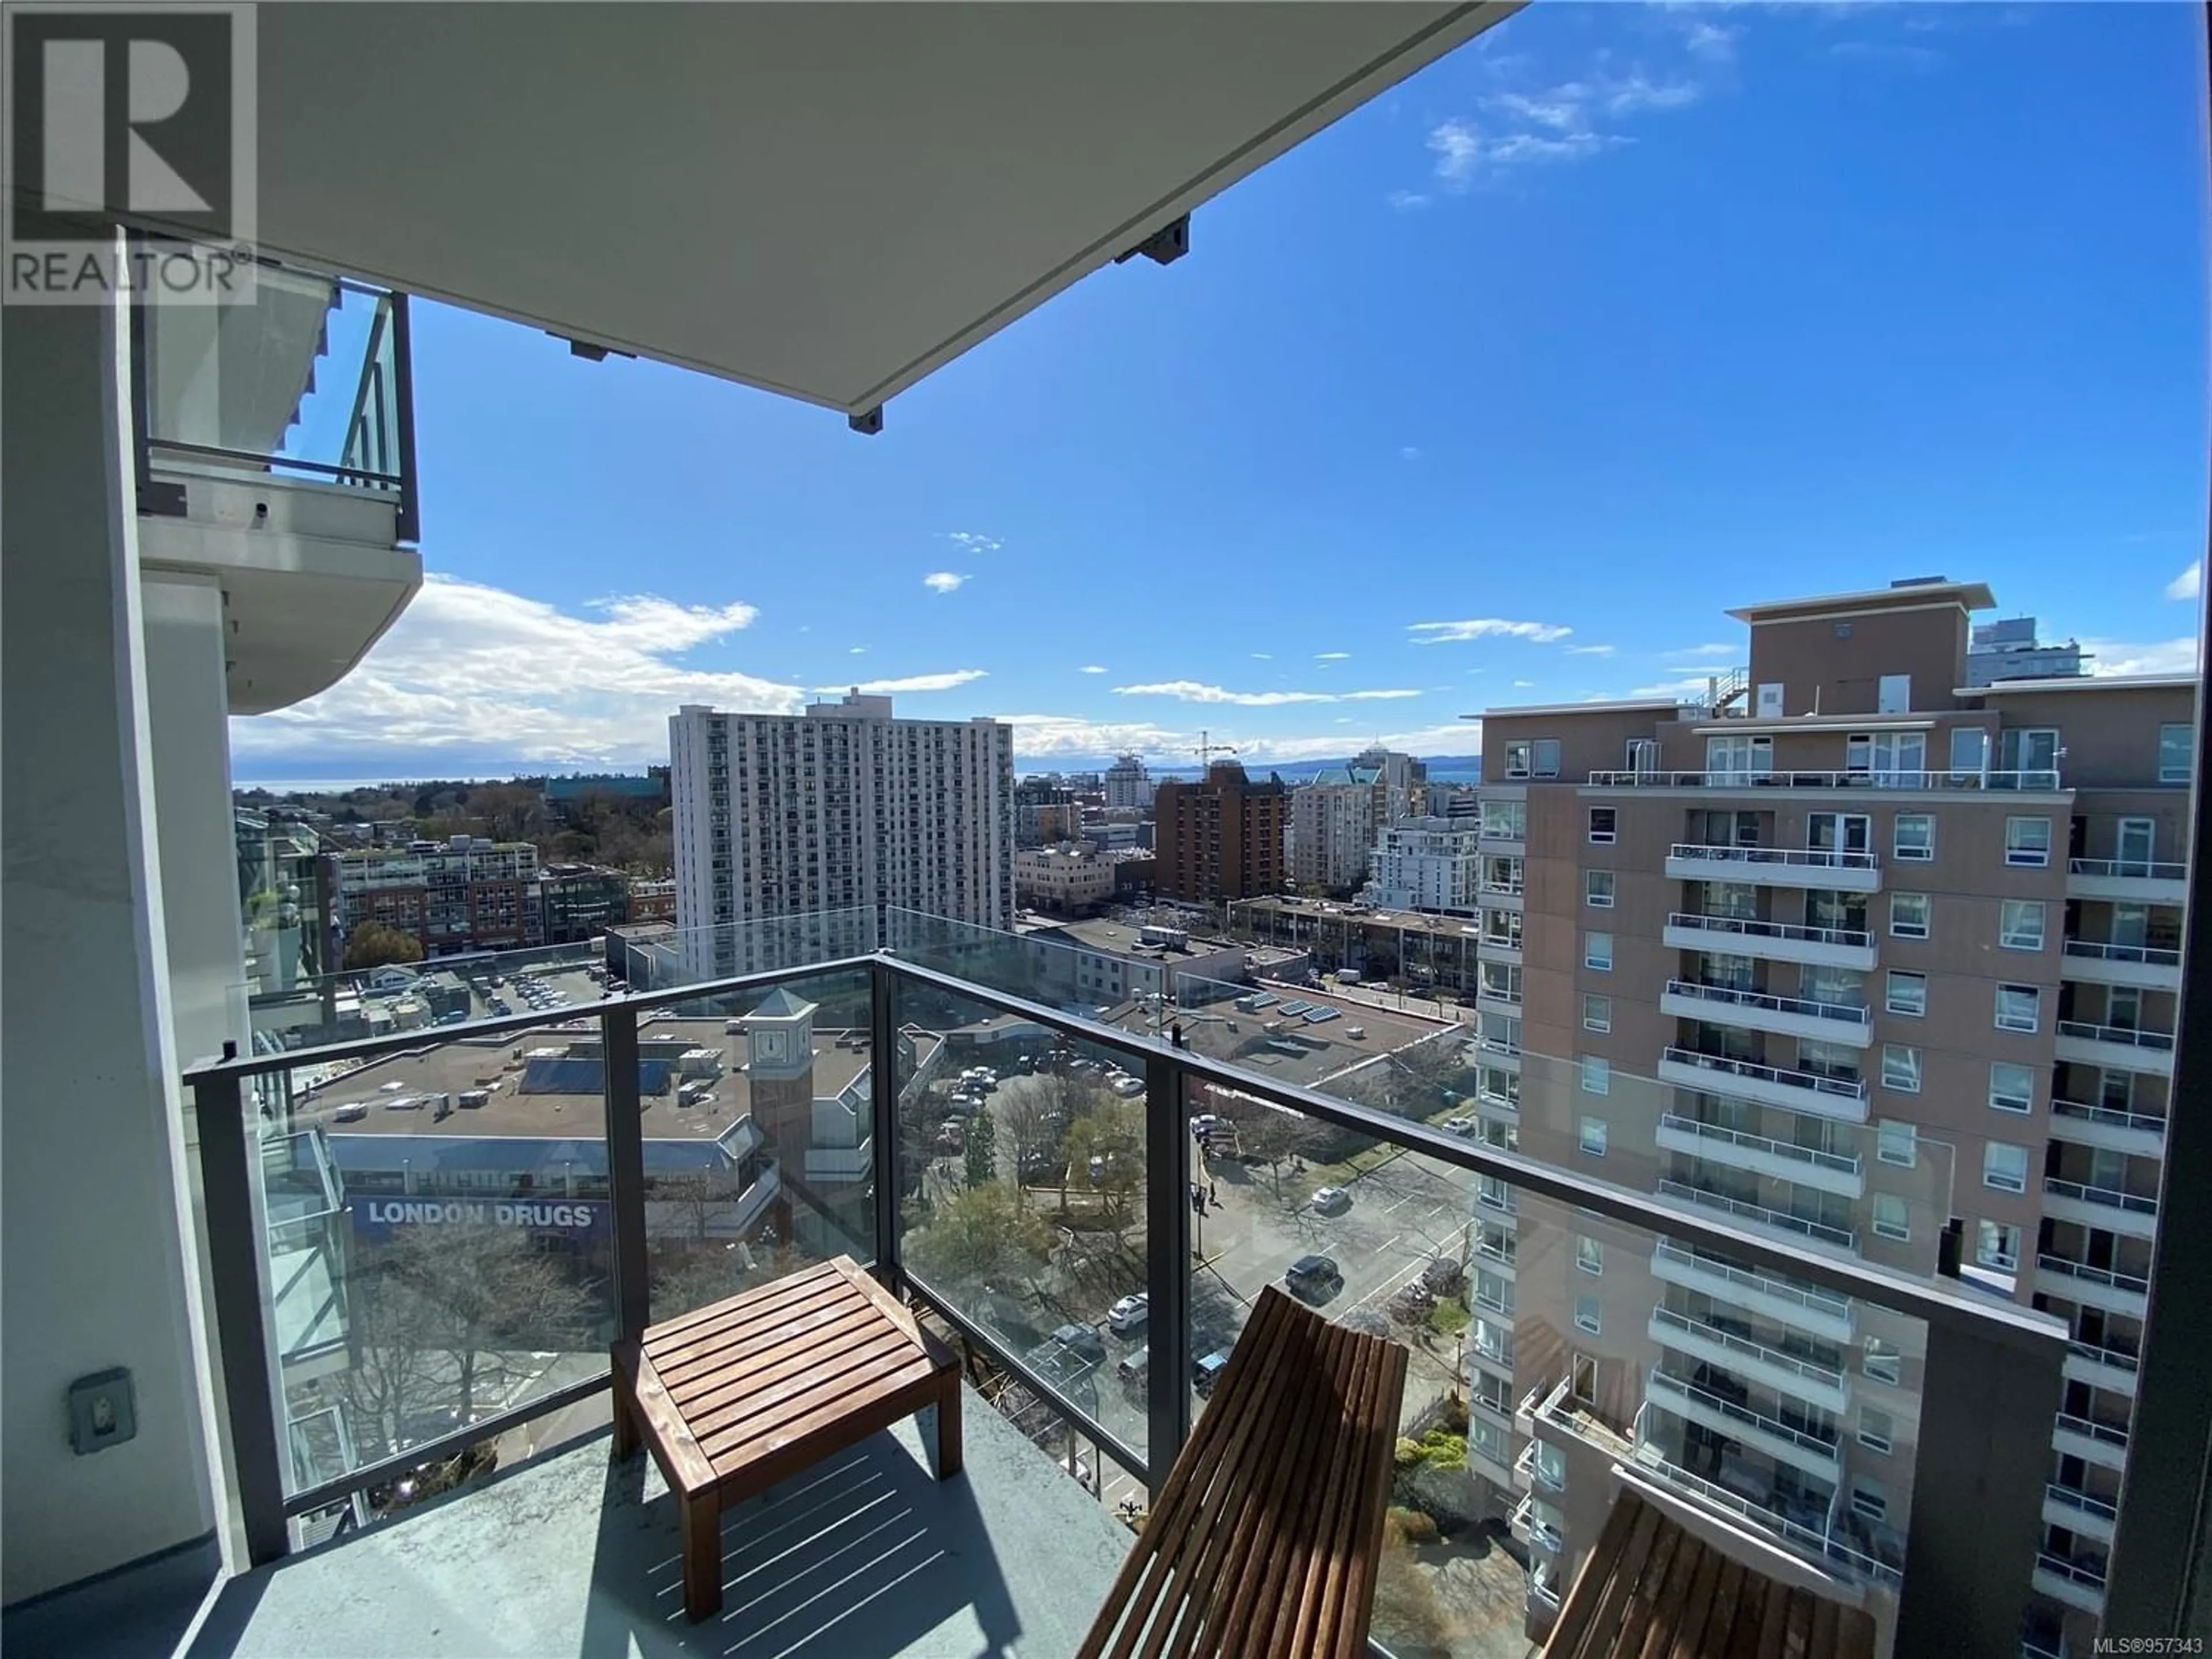 Balcony in the apartment for 1505 960 Yates St, Victoria British Columbia V8V3M3